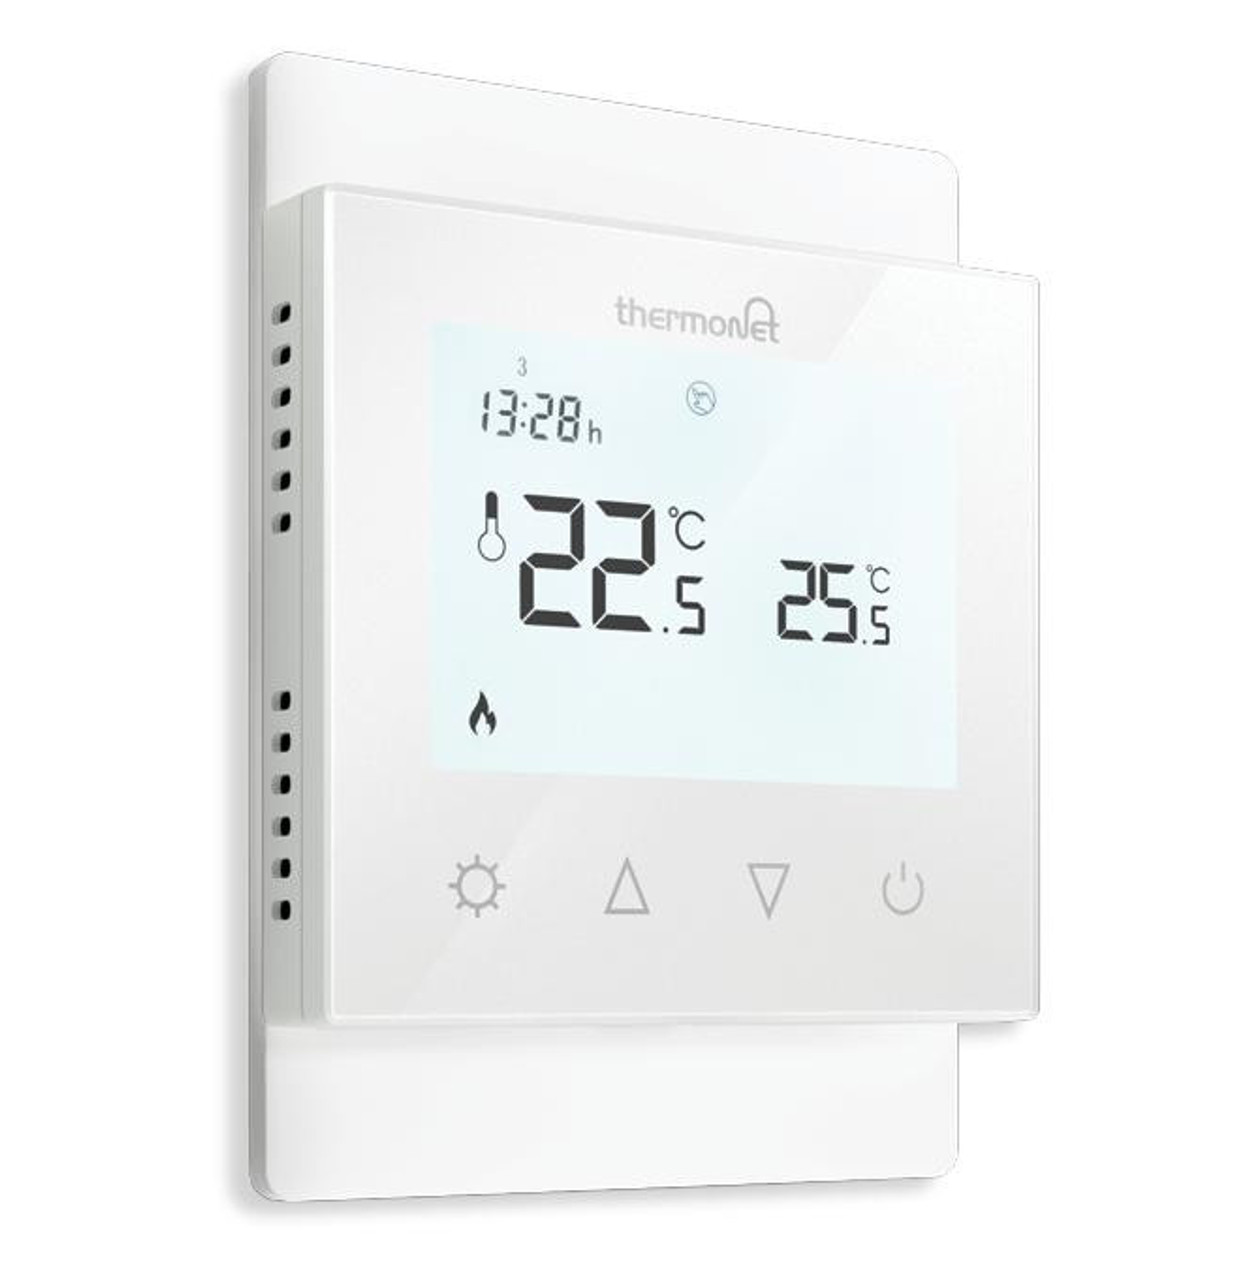 Thermonet EZ 150W/m² Underfloor Heating Kit 115012T with Programmable Thermostat 5220A 6m²